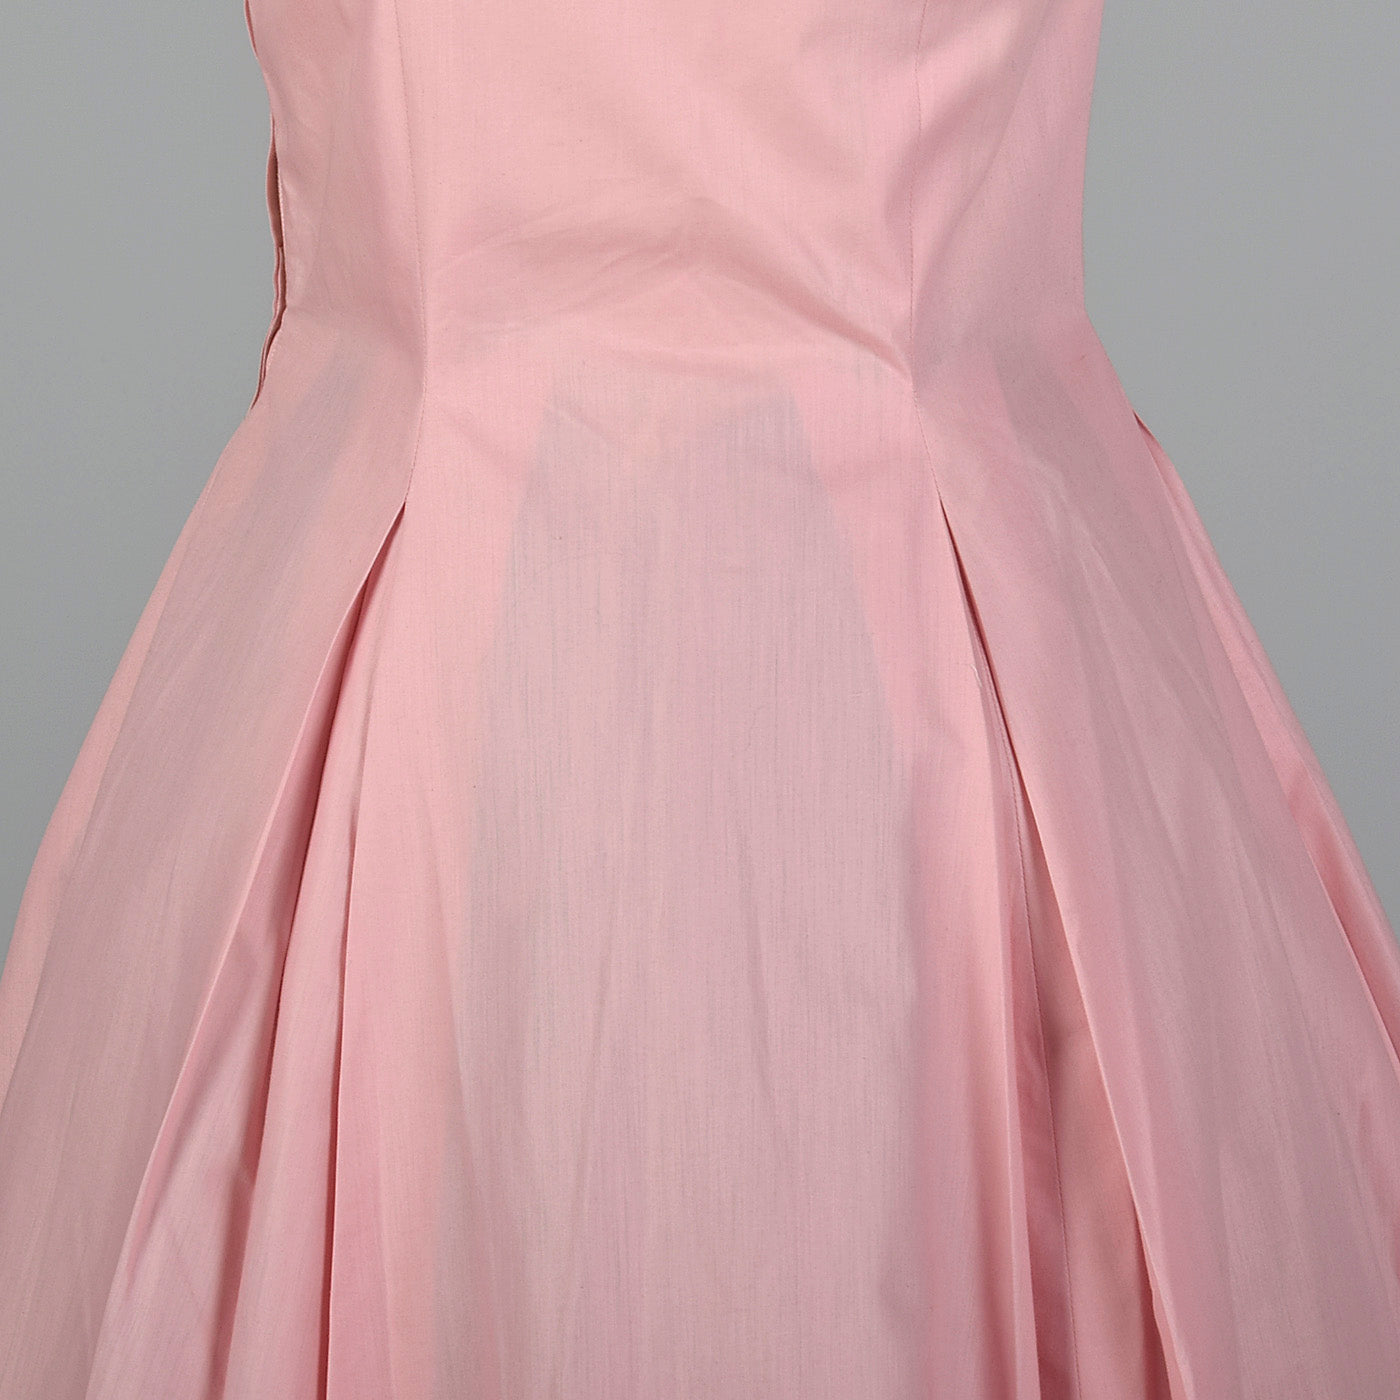 1950s Pink Party Dress with Full Skirt